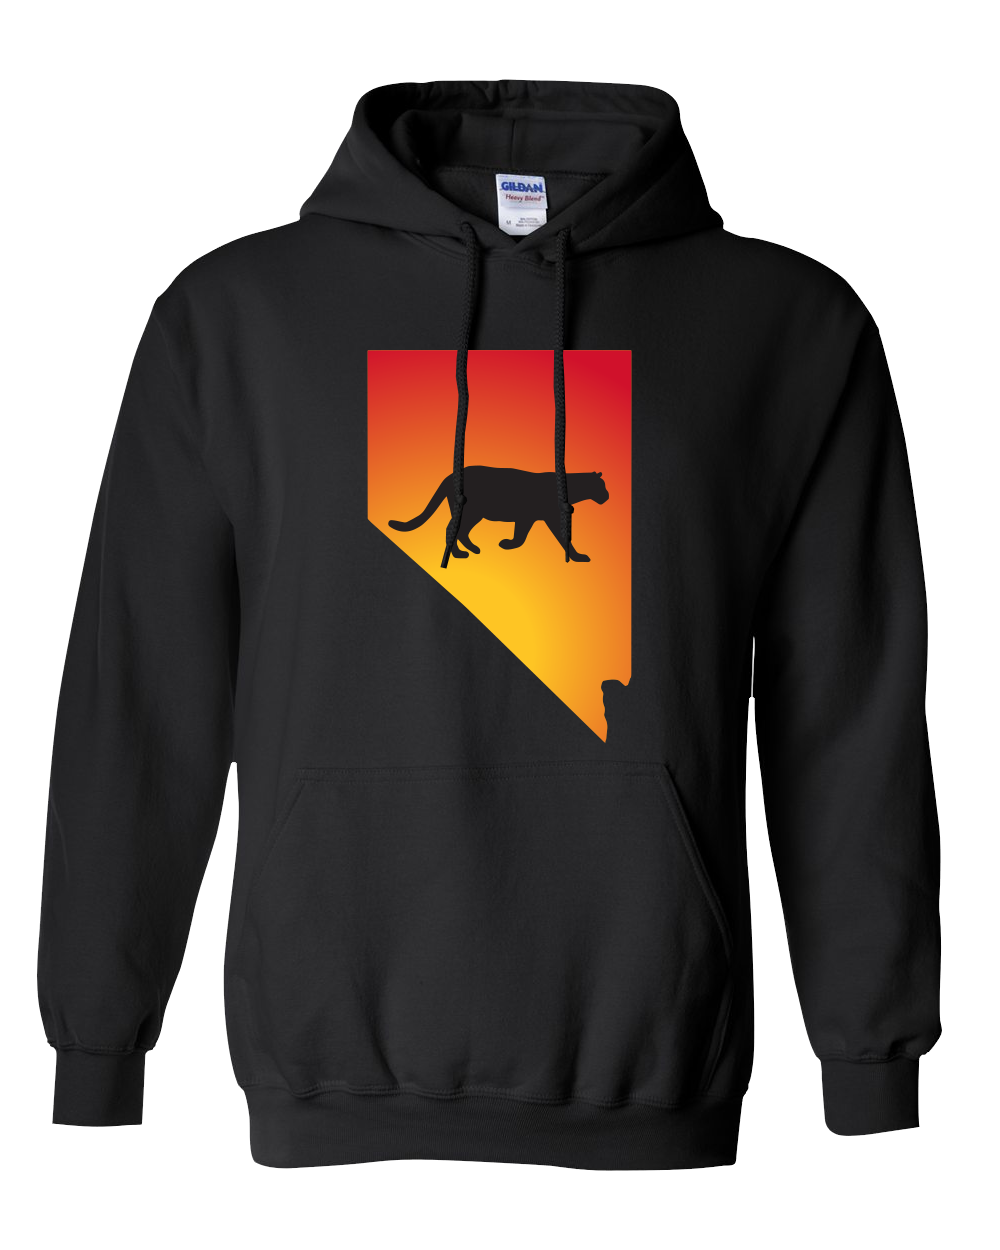 Pullover Hooded Sweatshirt Nevada Black Mountain Lion Vibrant Design High Quality Tight Knit Ring Spun Low Maintenance Cotton Printed With The Newest Available Color Transfer Technology